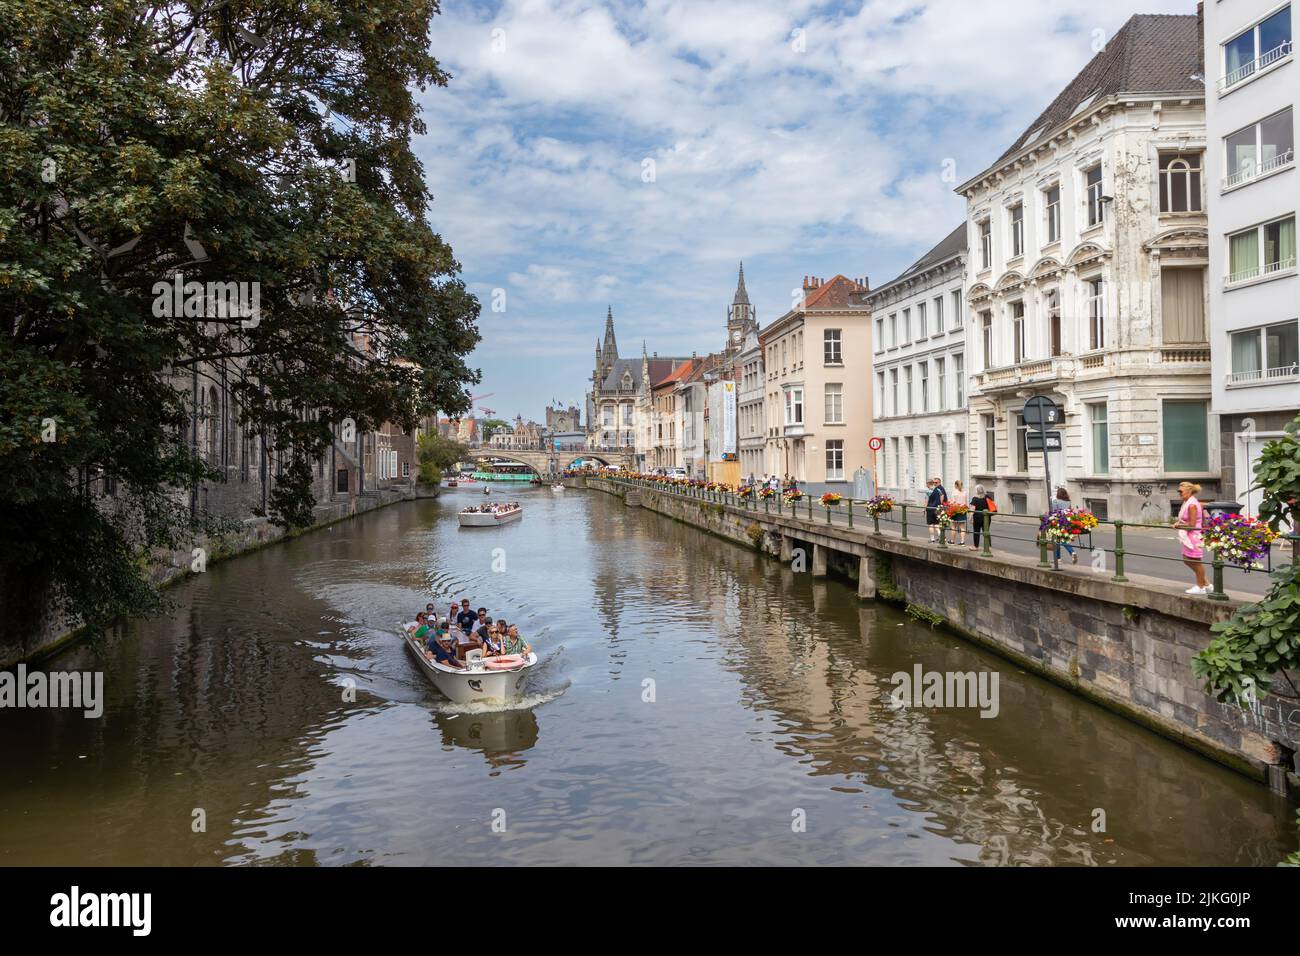 Ghent, Belgium - July 13, 2018: The Leie River and Ajuinlei Street Stock Photo